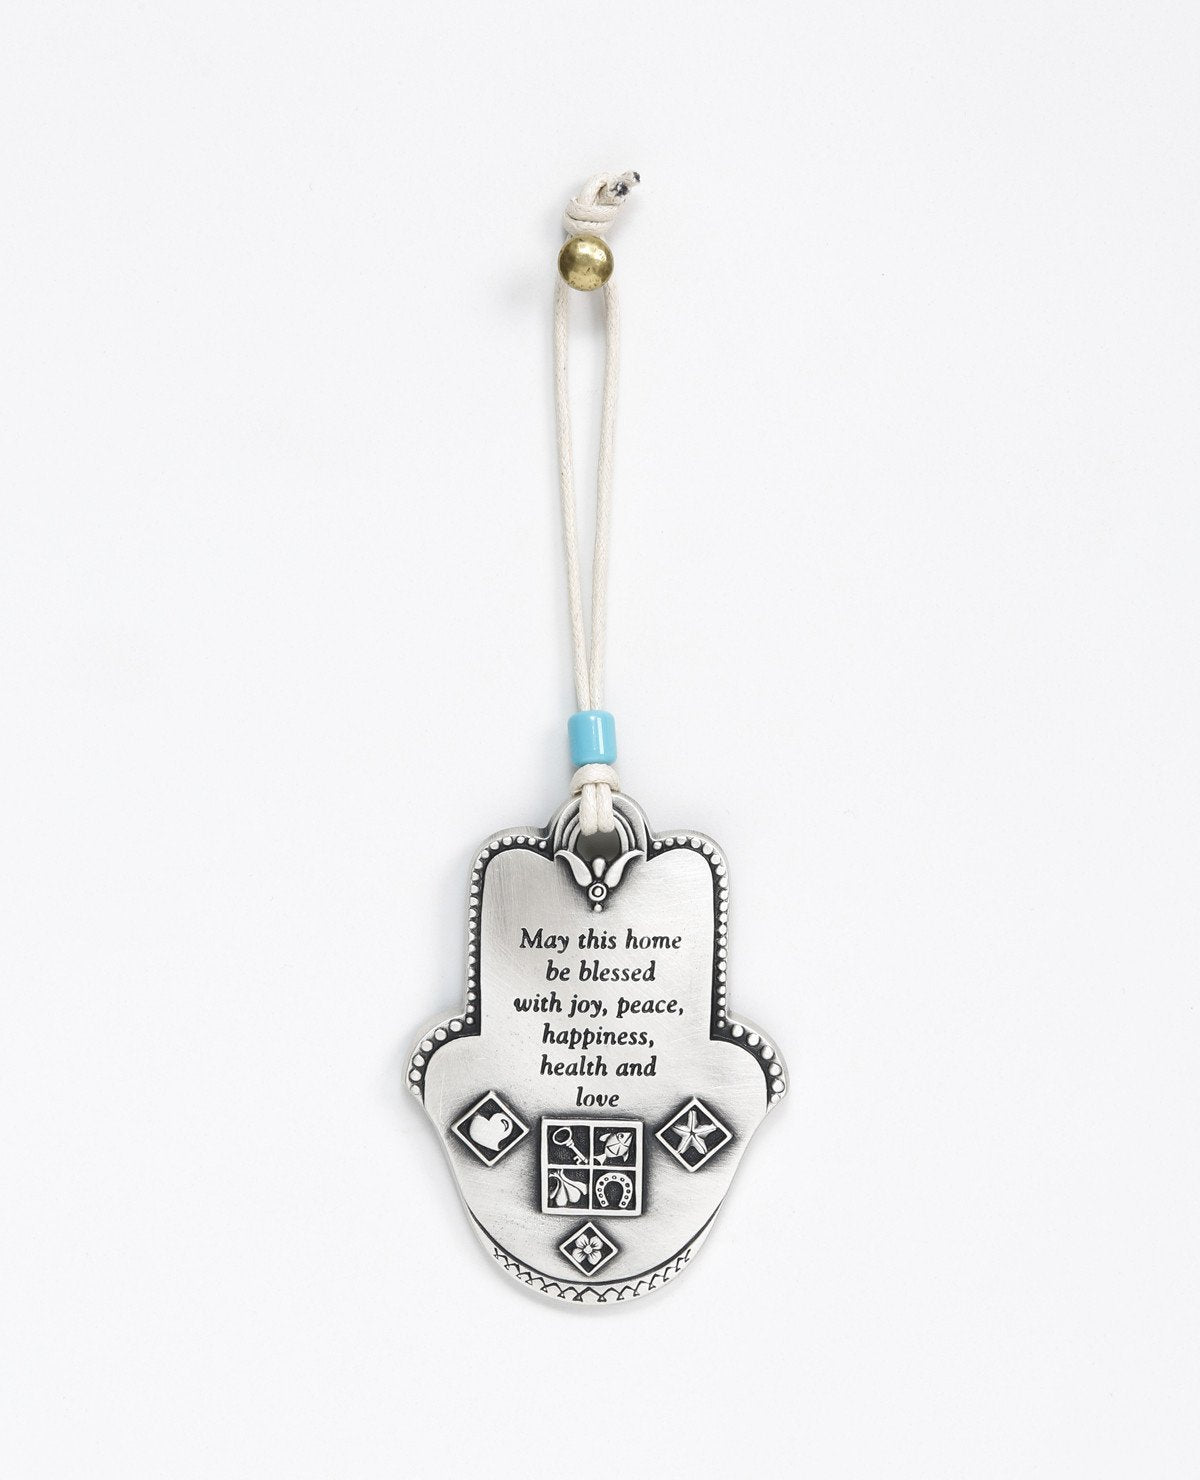 Uniquely designed sterling silver coated Hamsa Home Blessing hanging ornament. The Hamsa is decorated with embossed geometrical shapes, symbolizing abundance, fertility, success and protection from the "evil eye". The ornament makes a wonderful gift for any home, one that displays attentiveness, invoking good luck and blessings to anyone who shall receive it. Comes with a faux leather string for hanging decorated with a turquoise bead. Additional languages available: Hebrew and Russian.  Length: 9 cm  Width